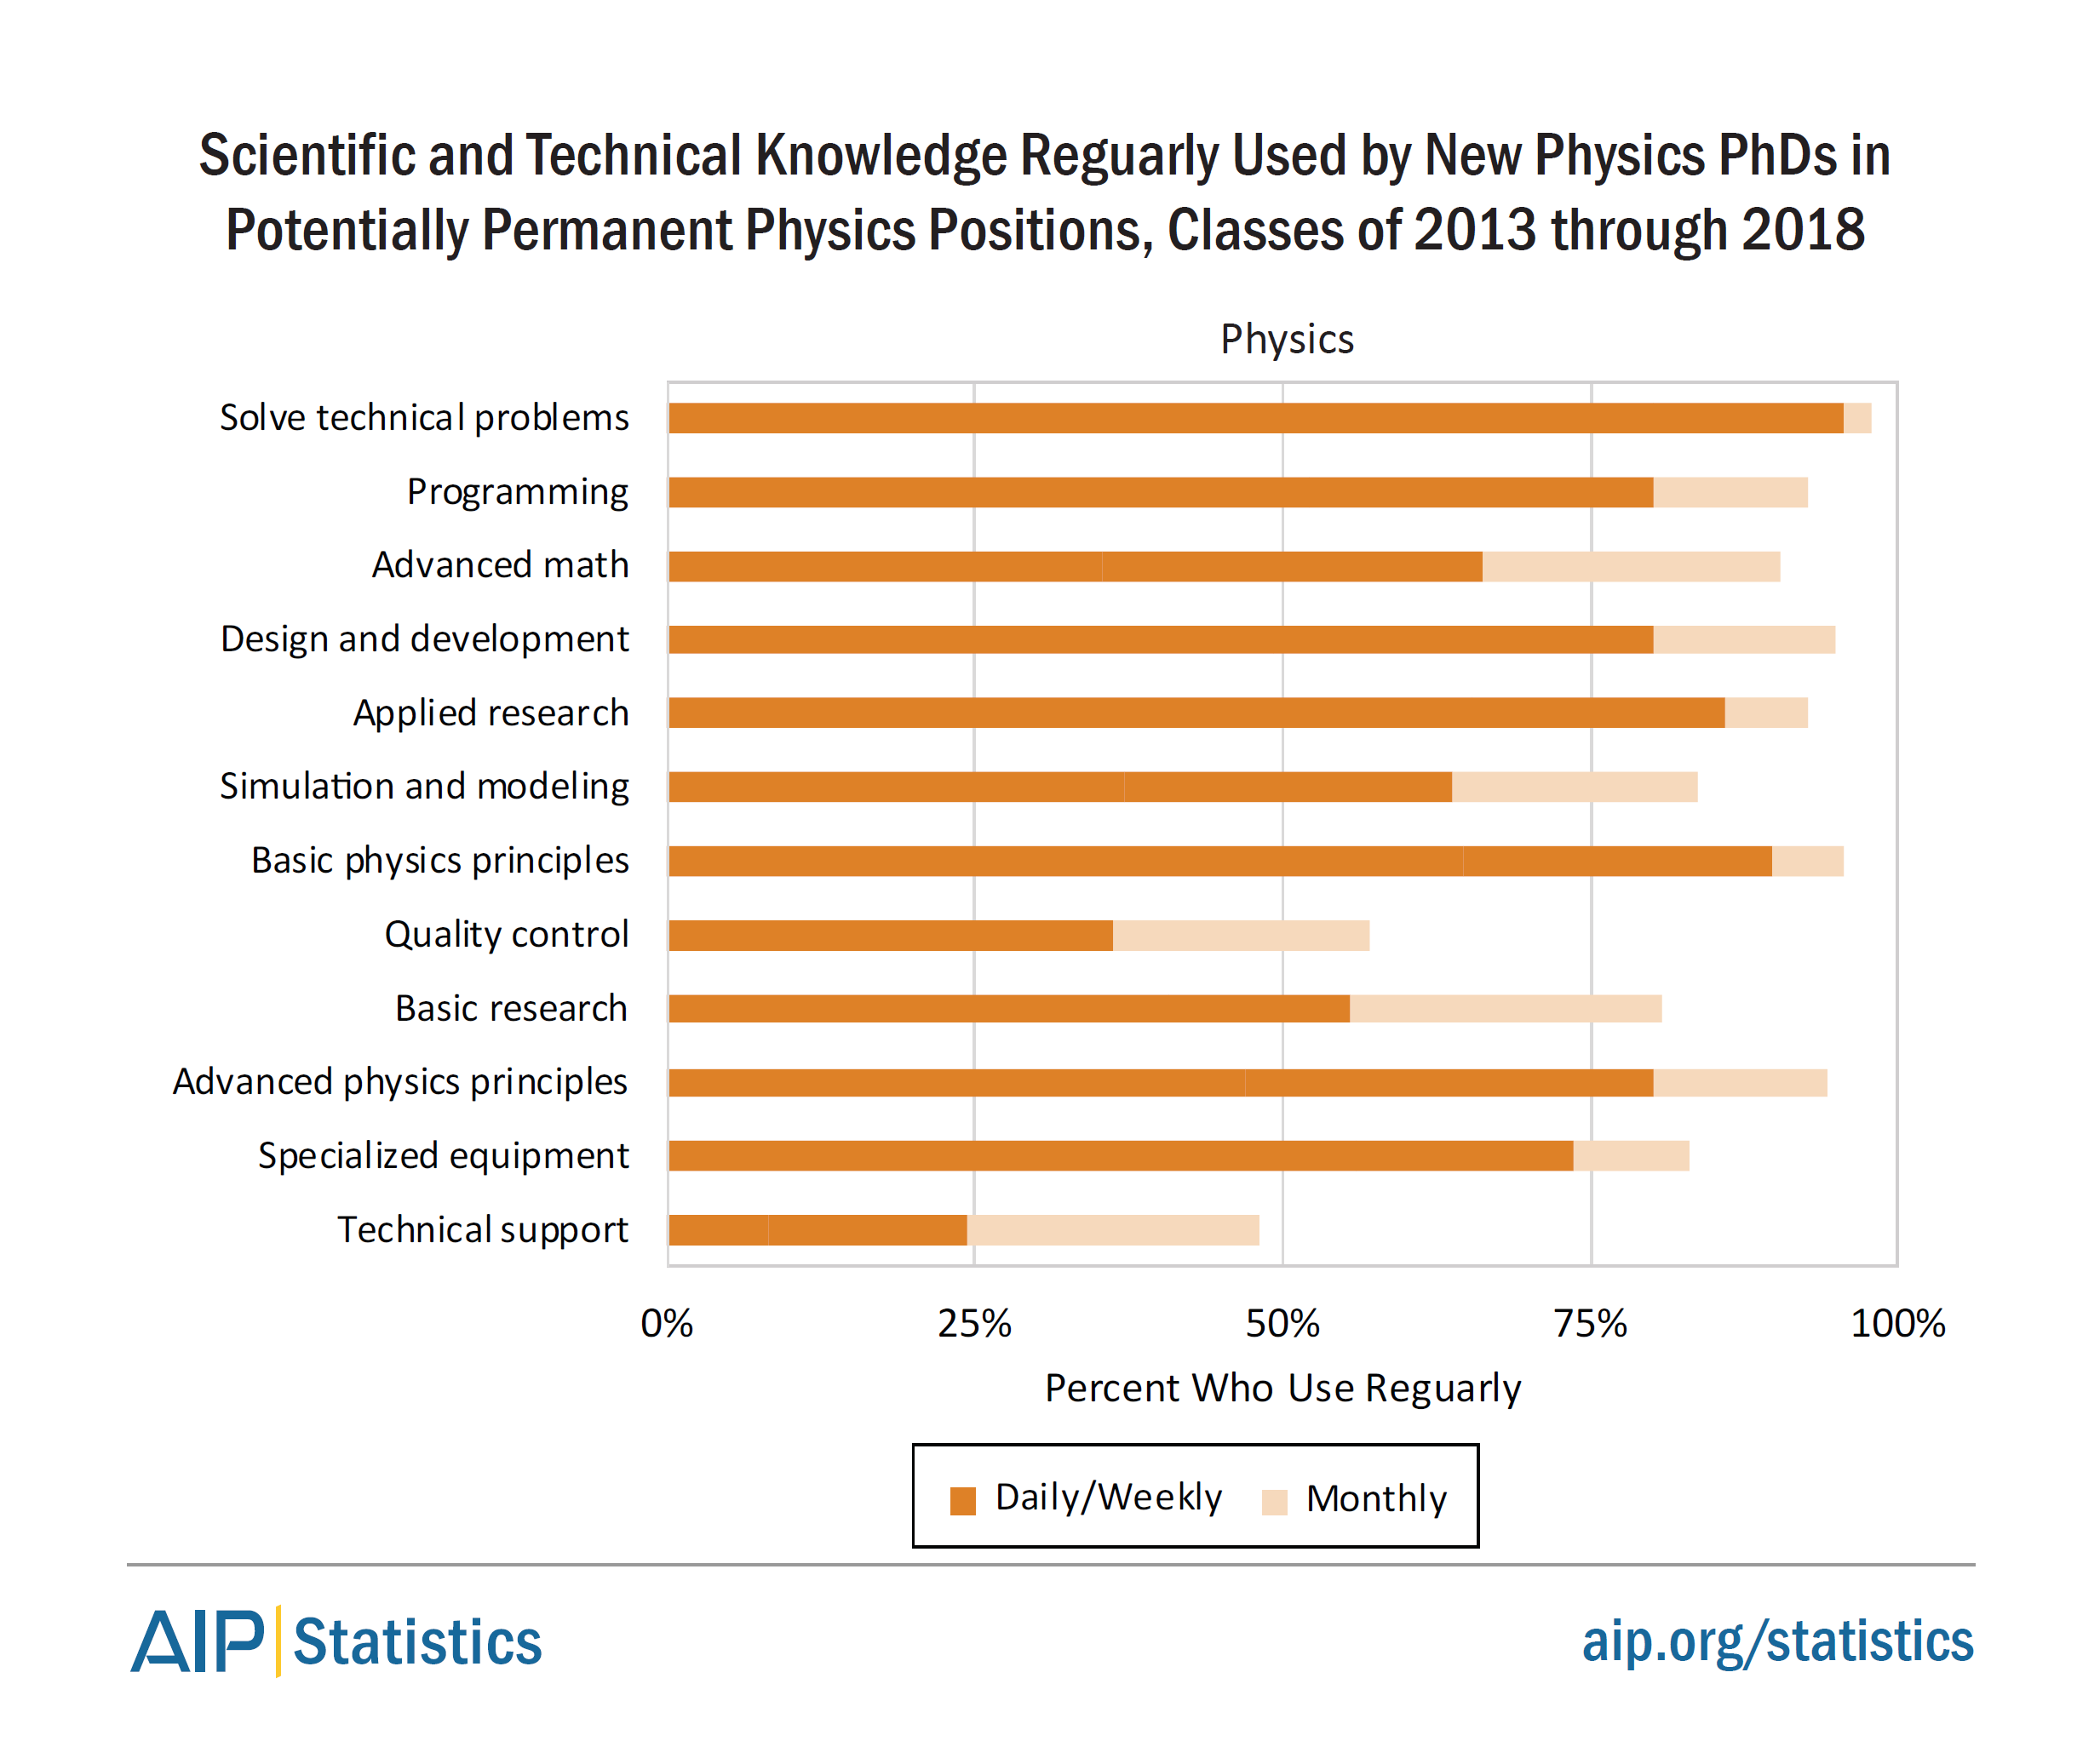 Scientific and Technical Knowledge Used by Physics PhDs in Physics Positions